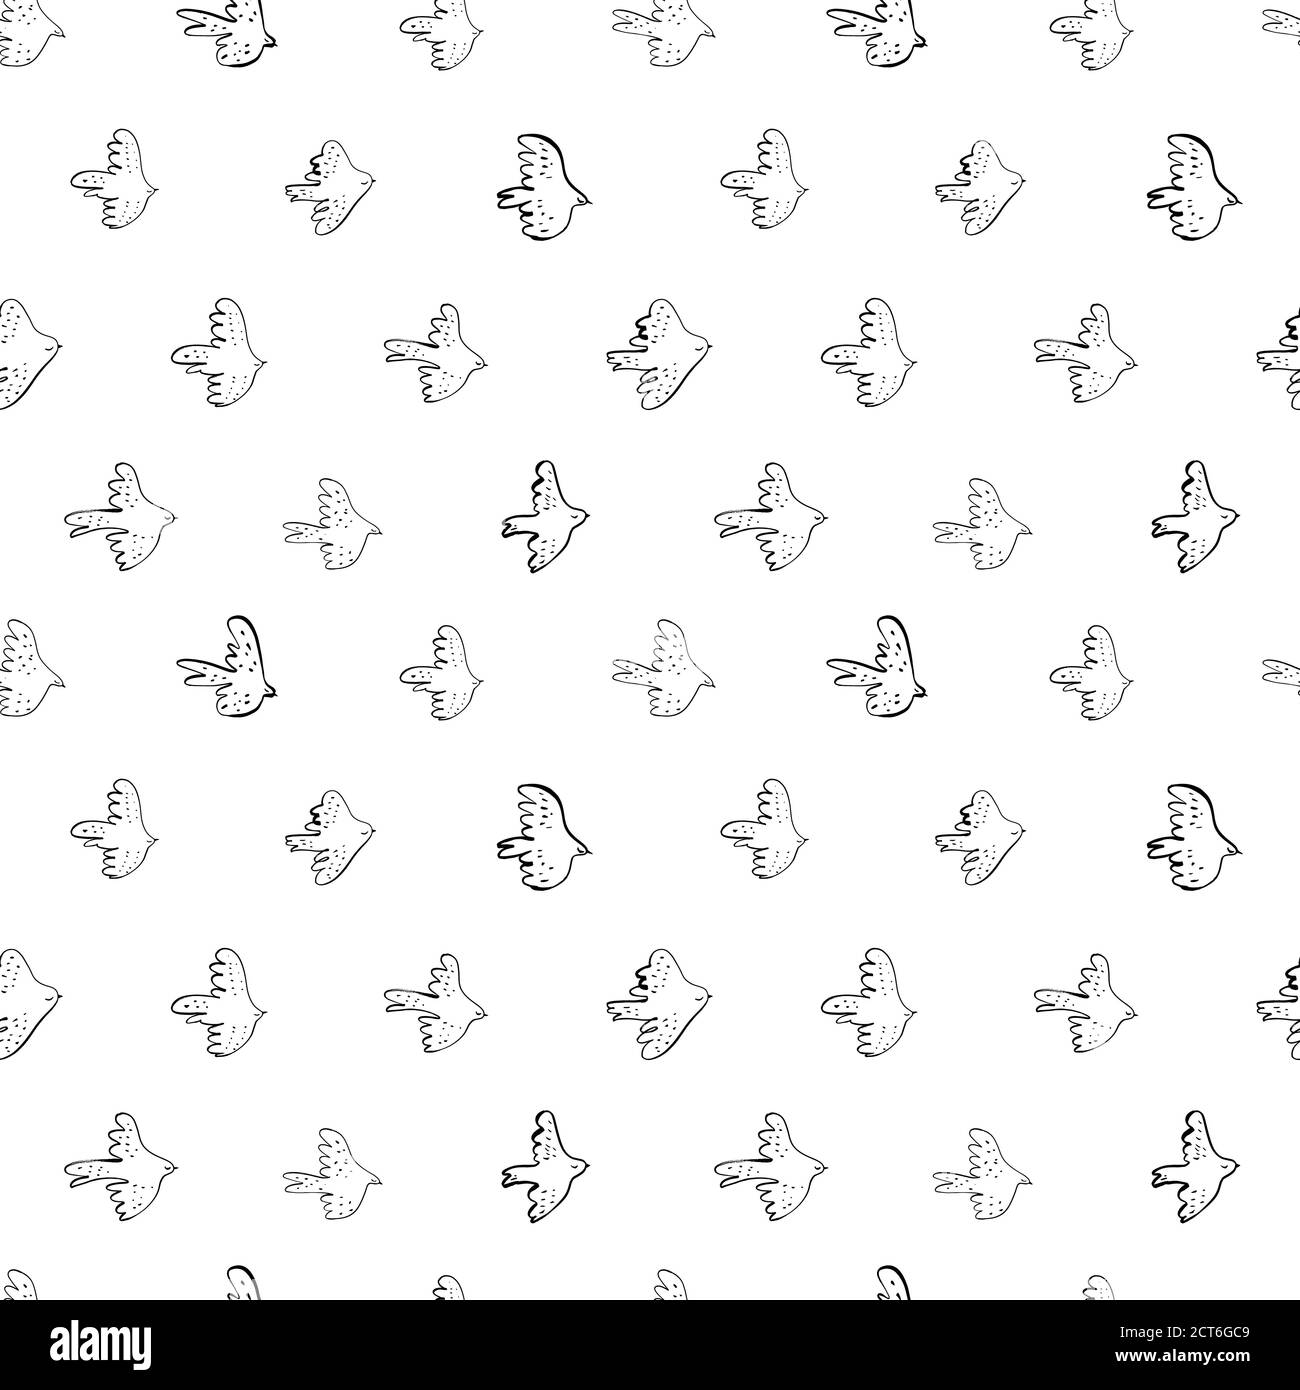 Seamless vector doodle pattern with black birds. Stock Vector